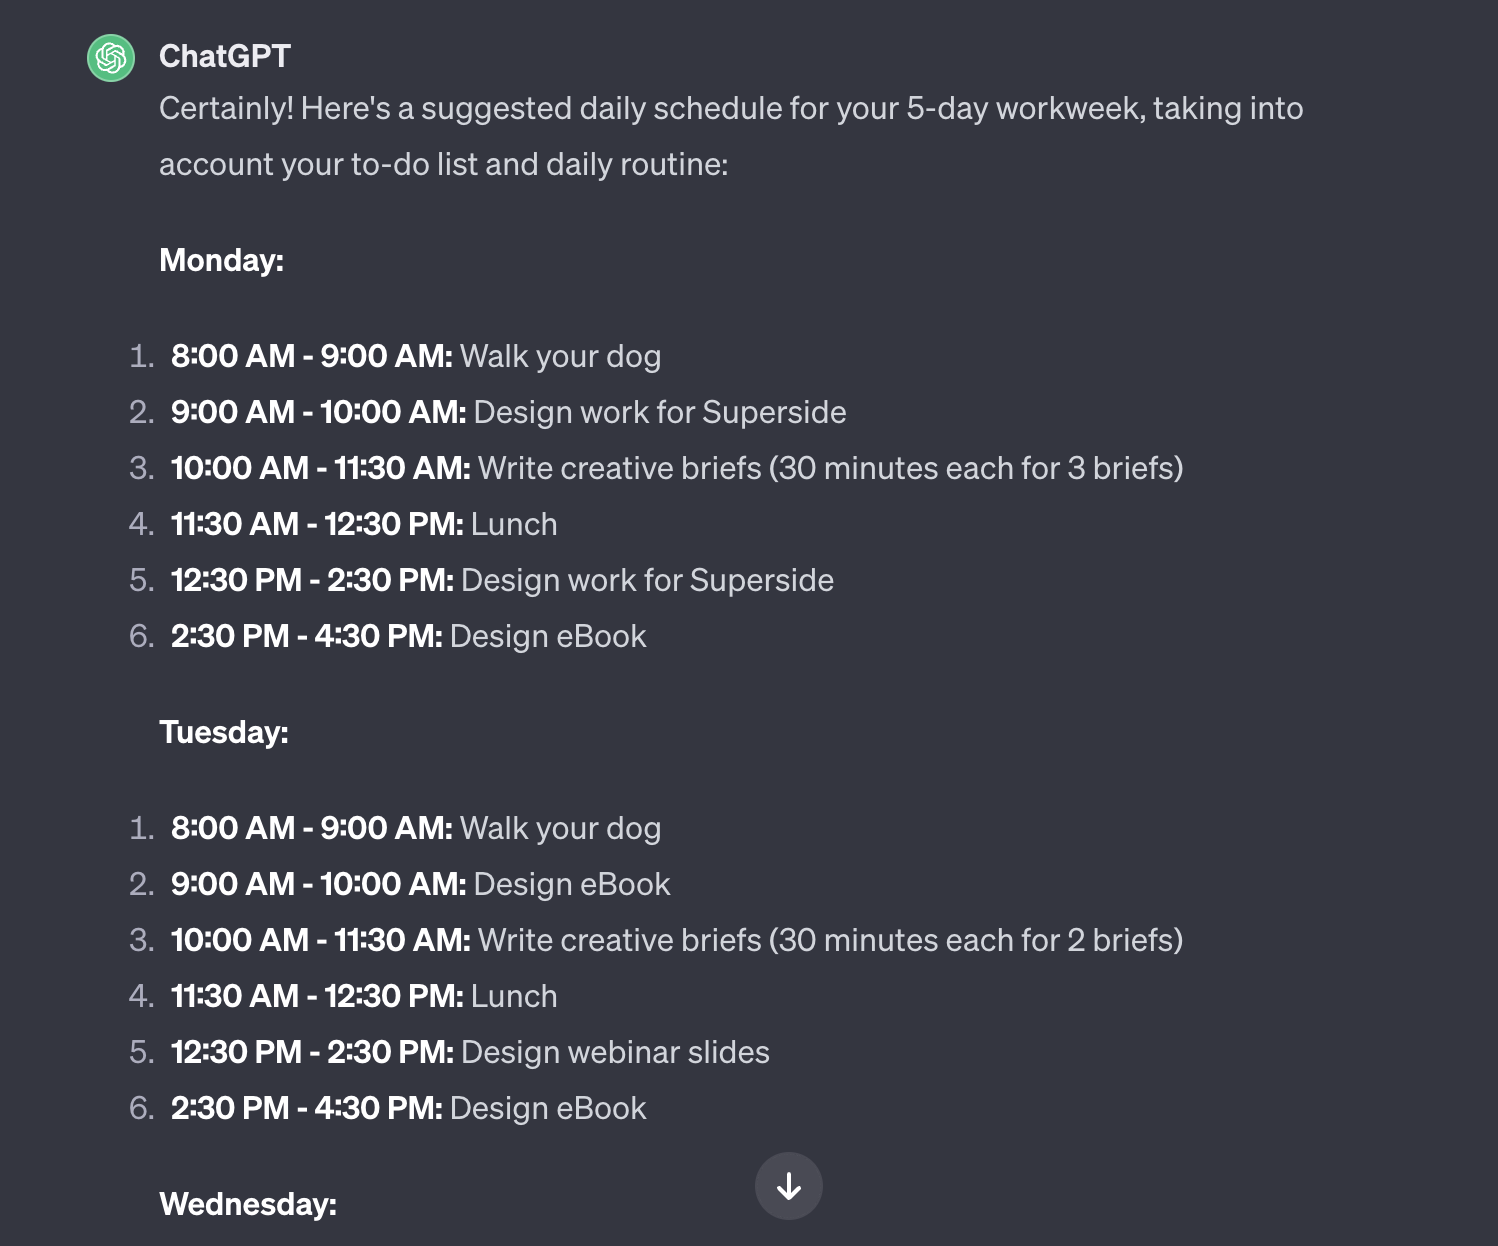 Streamlining your personal schedule - ChatGPT use case